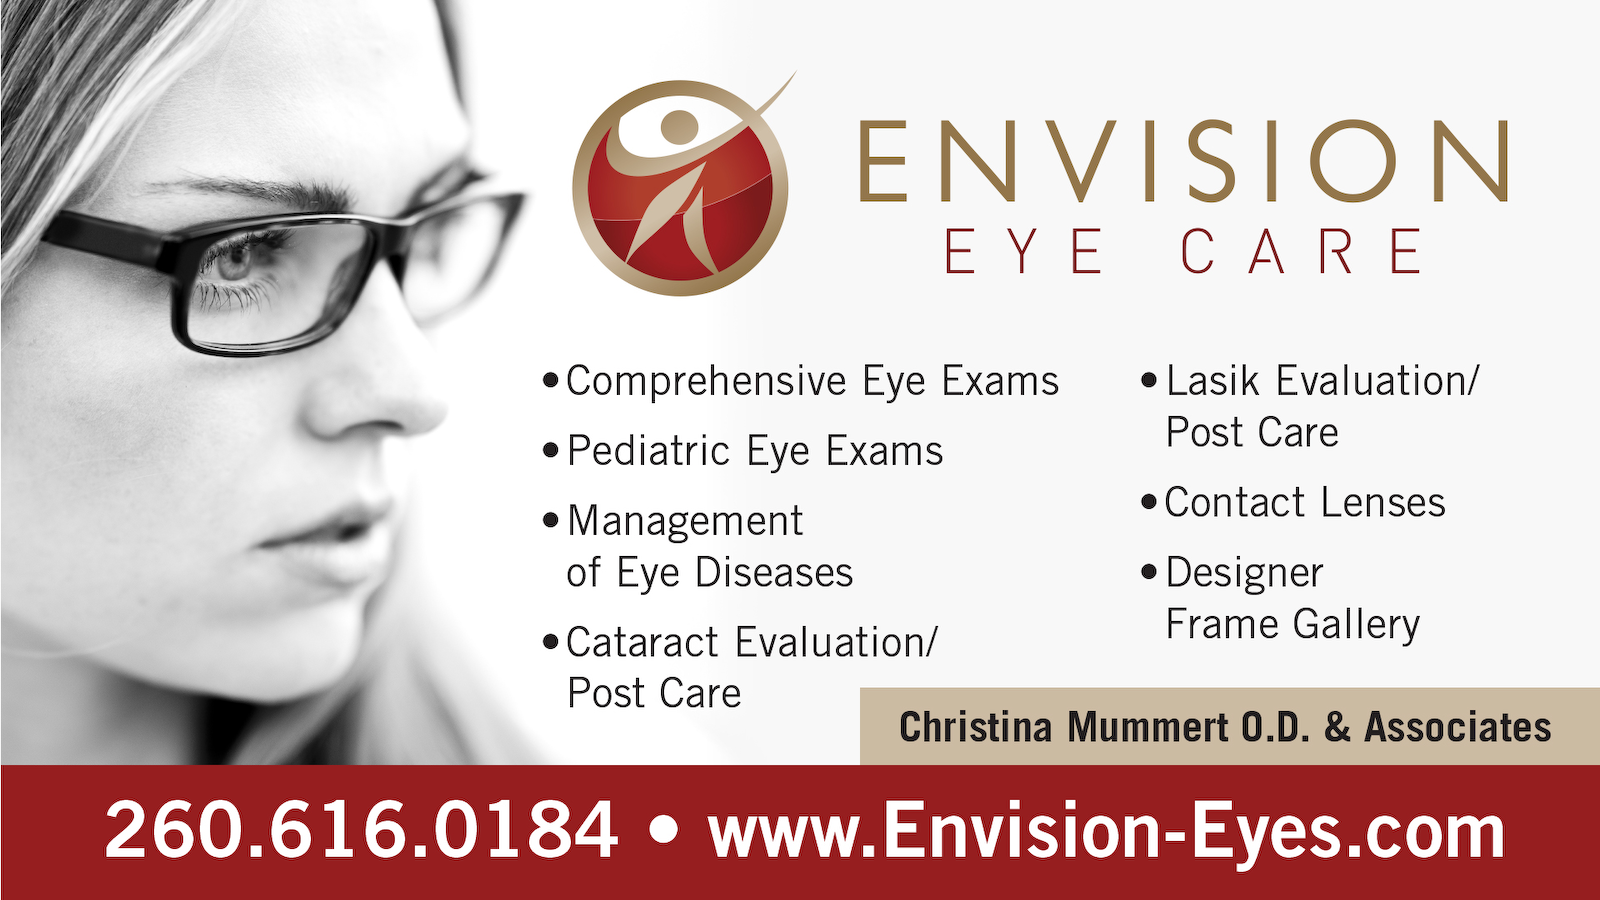 Comprehensive Eye Care for Your Whole Family!